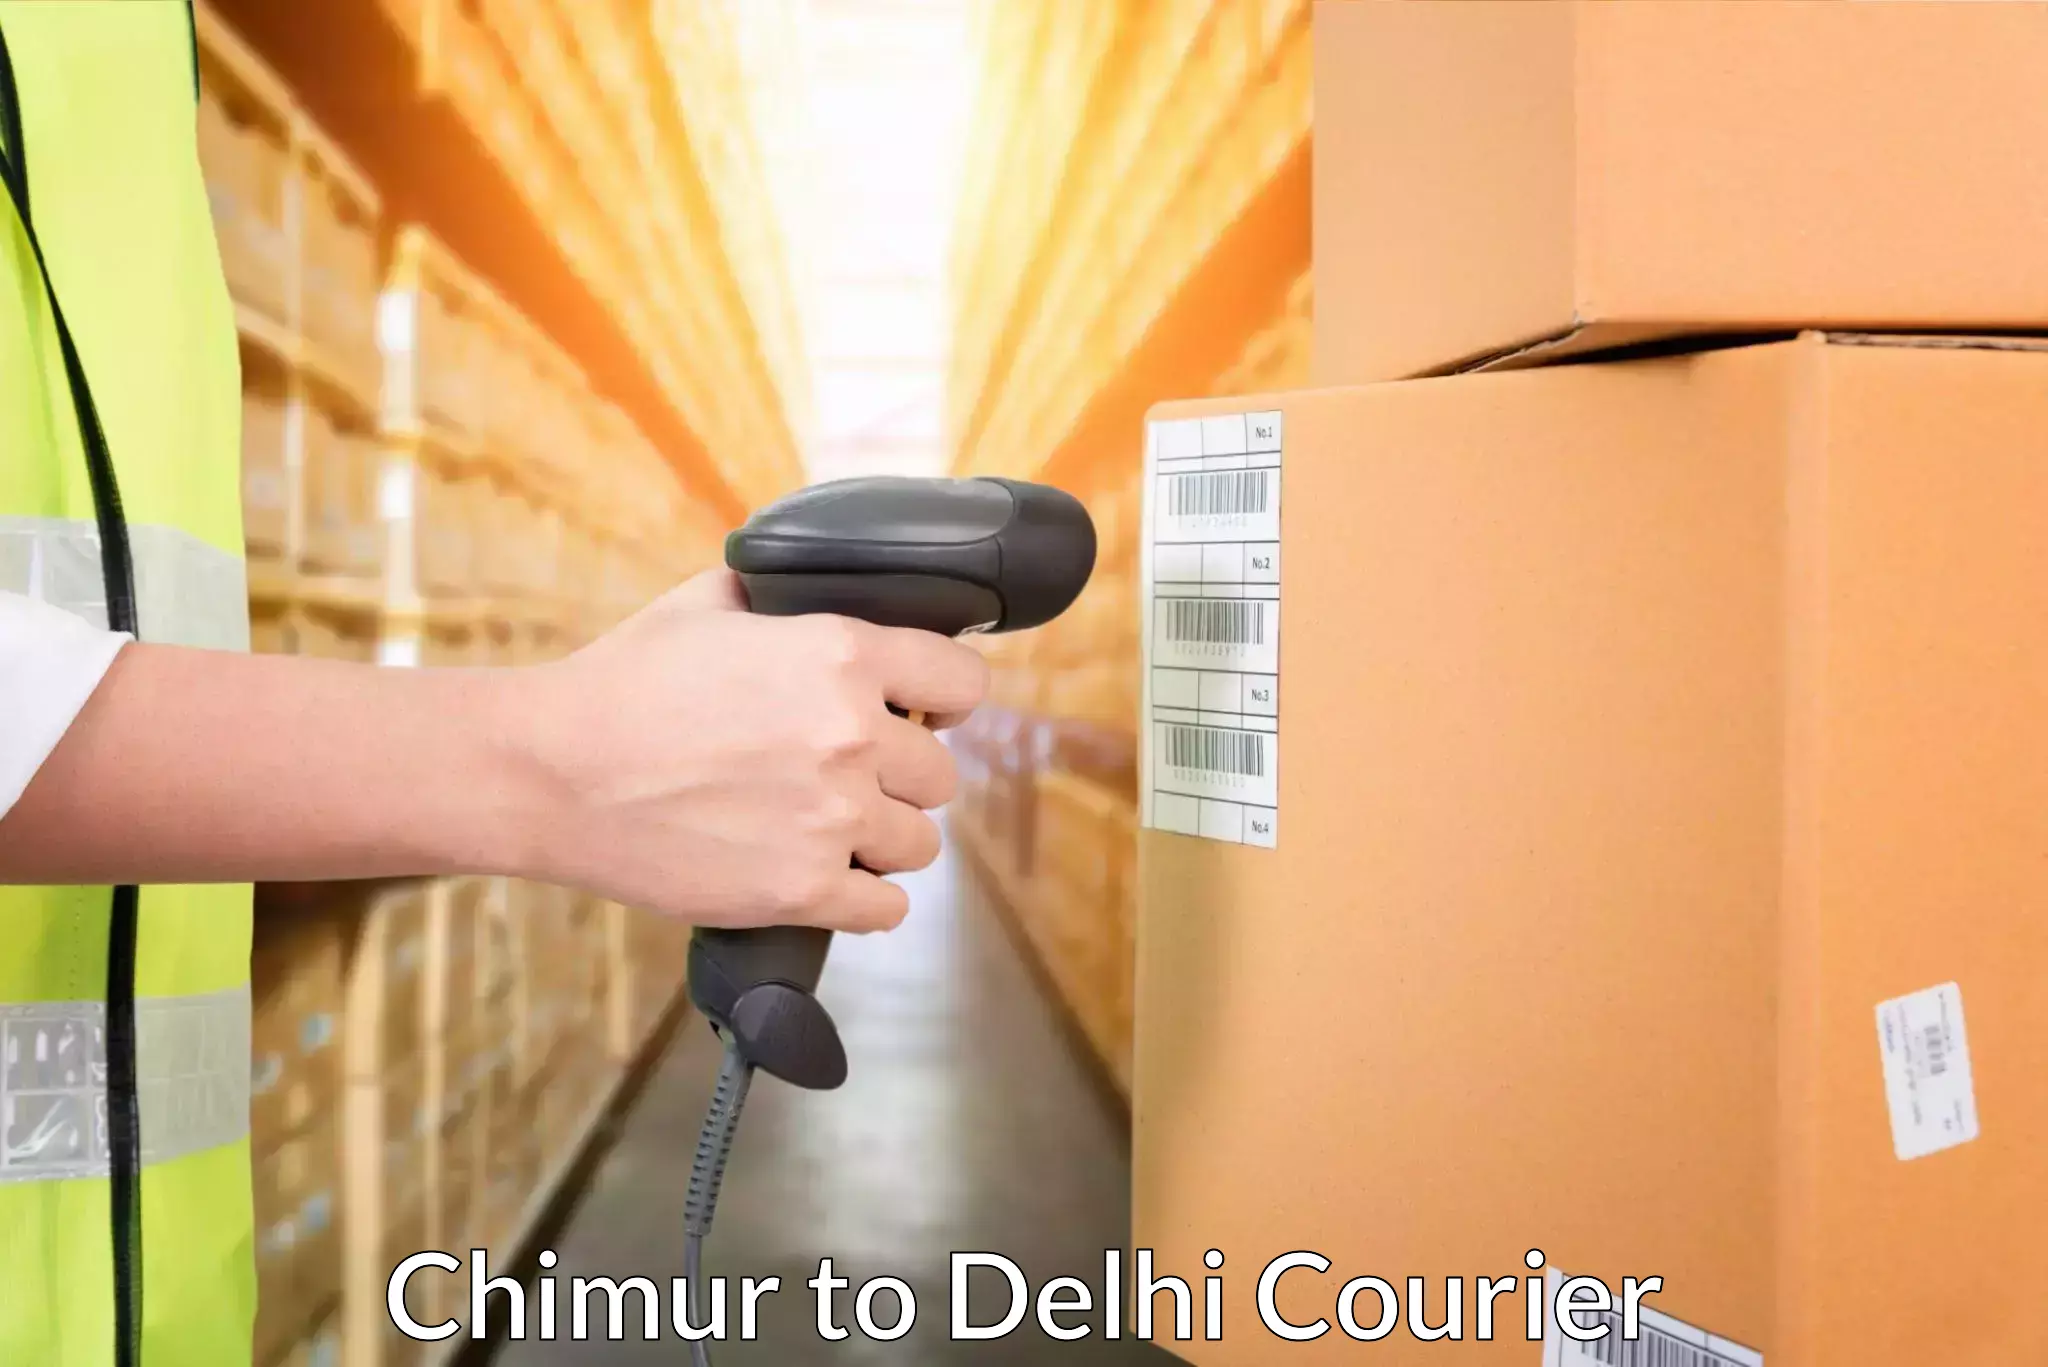 Courier service innovation Chimur to NCR